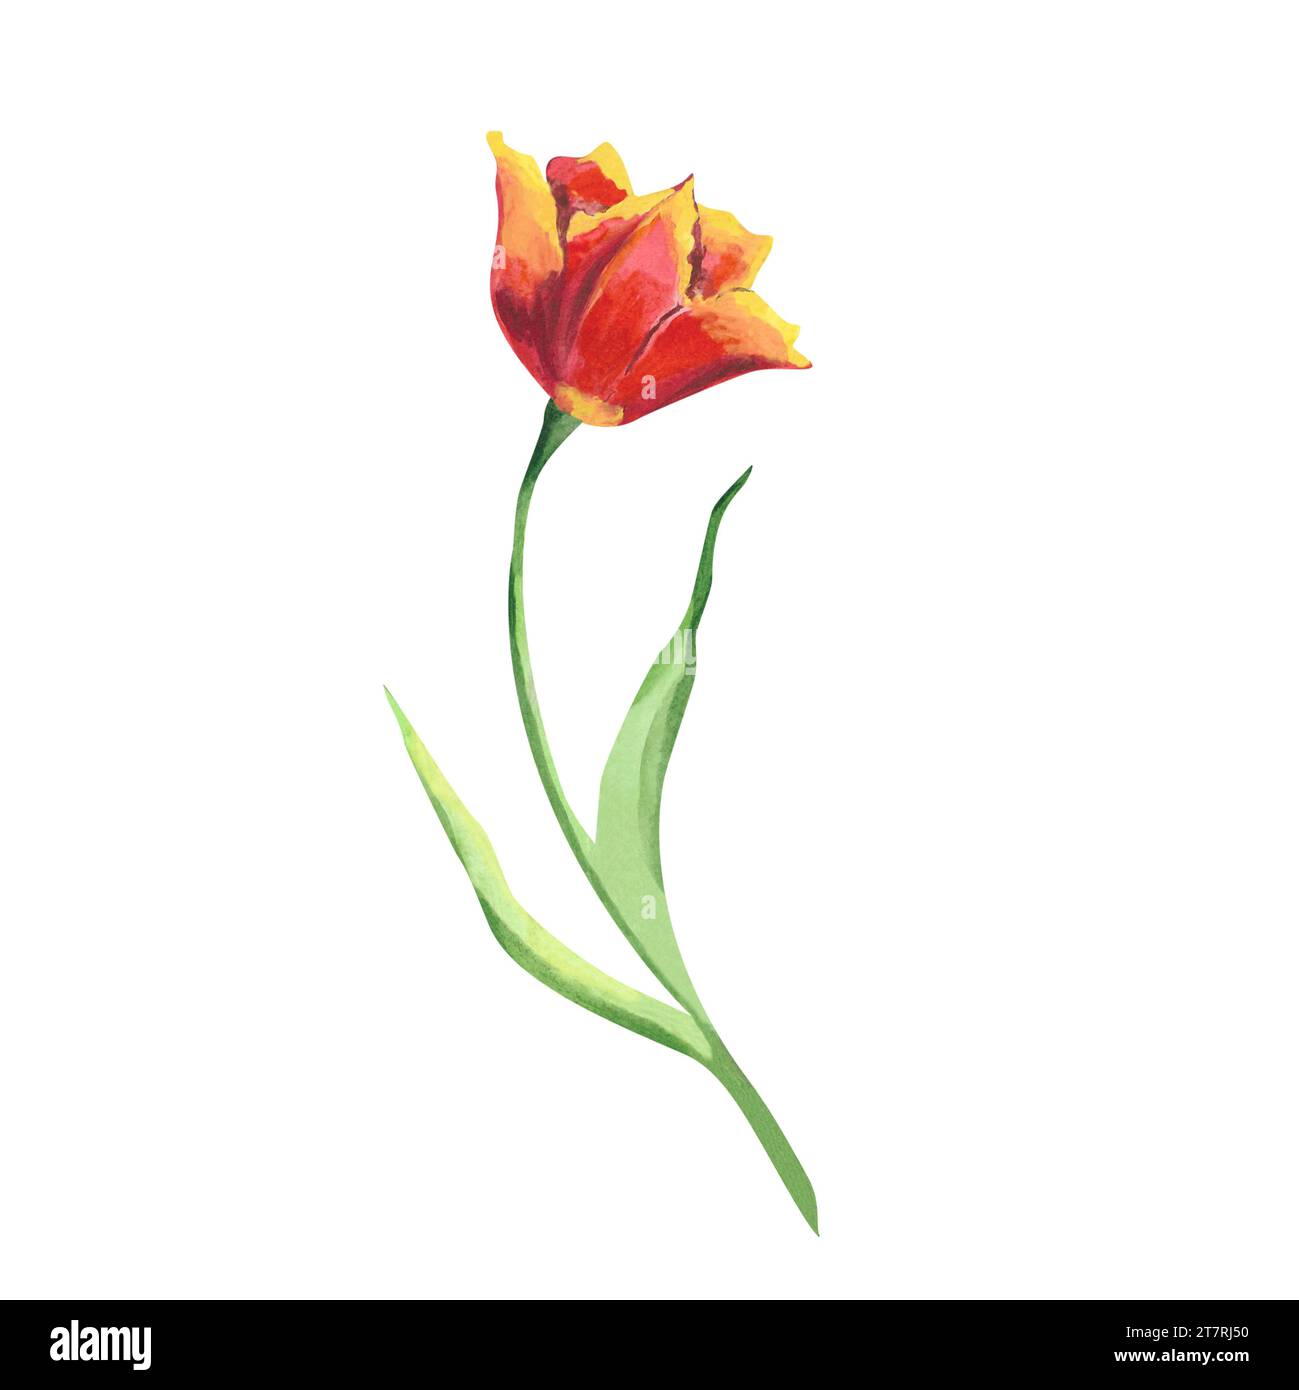 Watercolor illustration of red tulip Hand painted floral illustration of spring flower on white isolated background Design for greeting cards Stock Photo